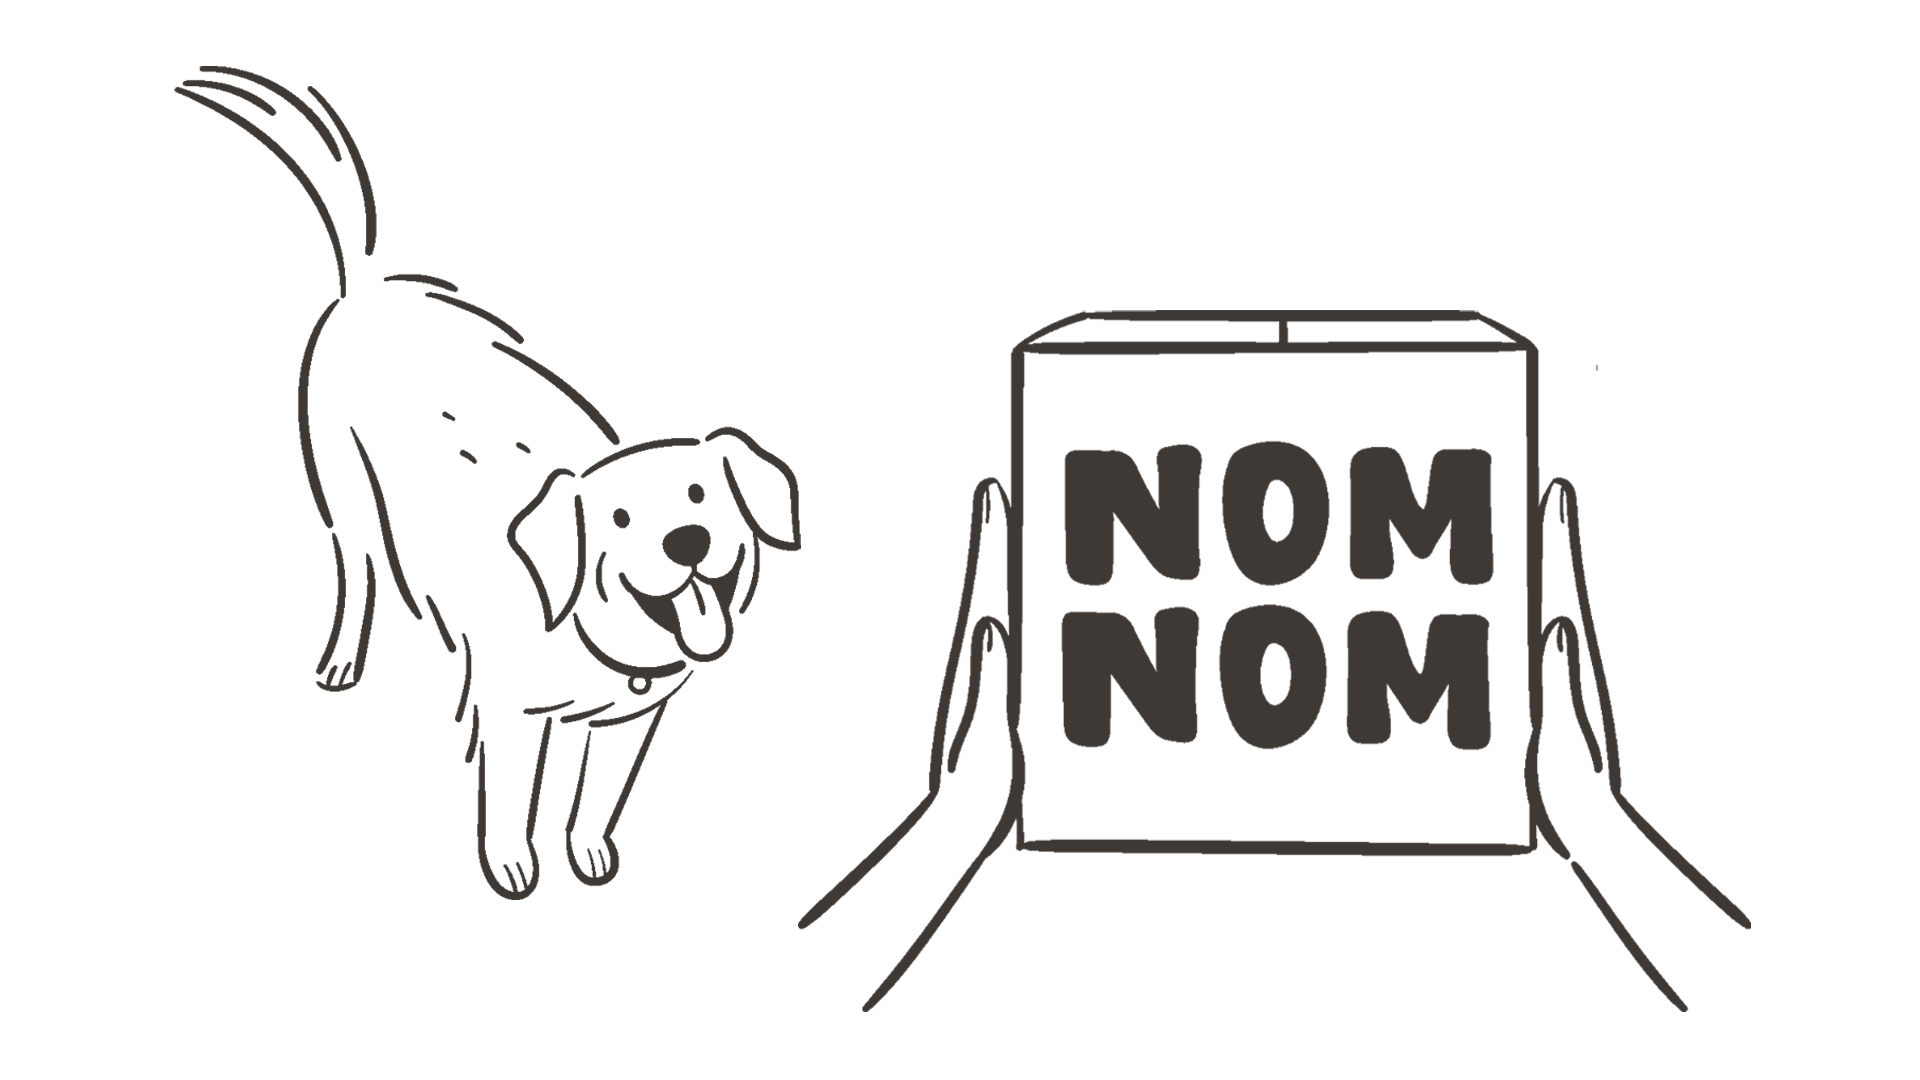 https://www.nomnomnow.com/images/home/how_it_works/dog_with_nom_nom_box_illustration.png